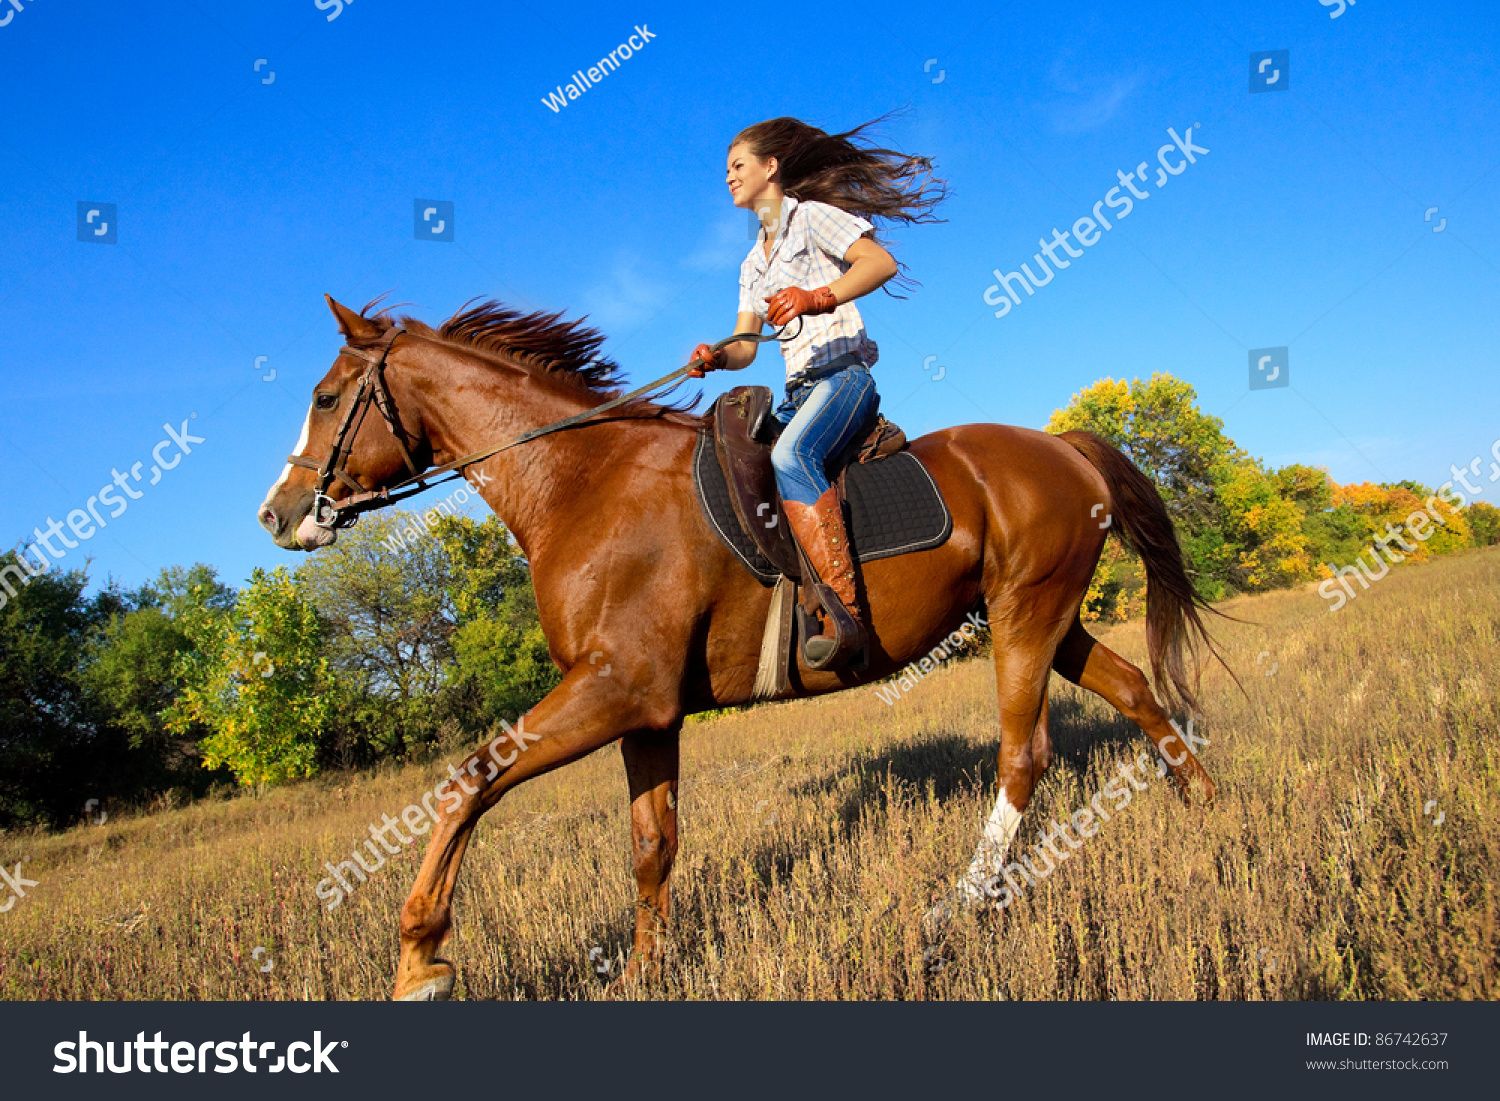 stock-photo-beautiful-girl-riding-a-horse-in-countryside-86742637.jpg